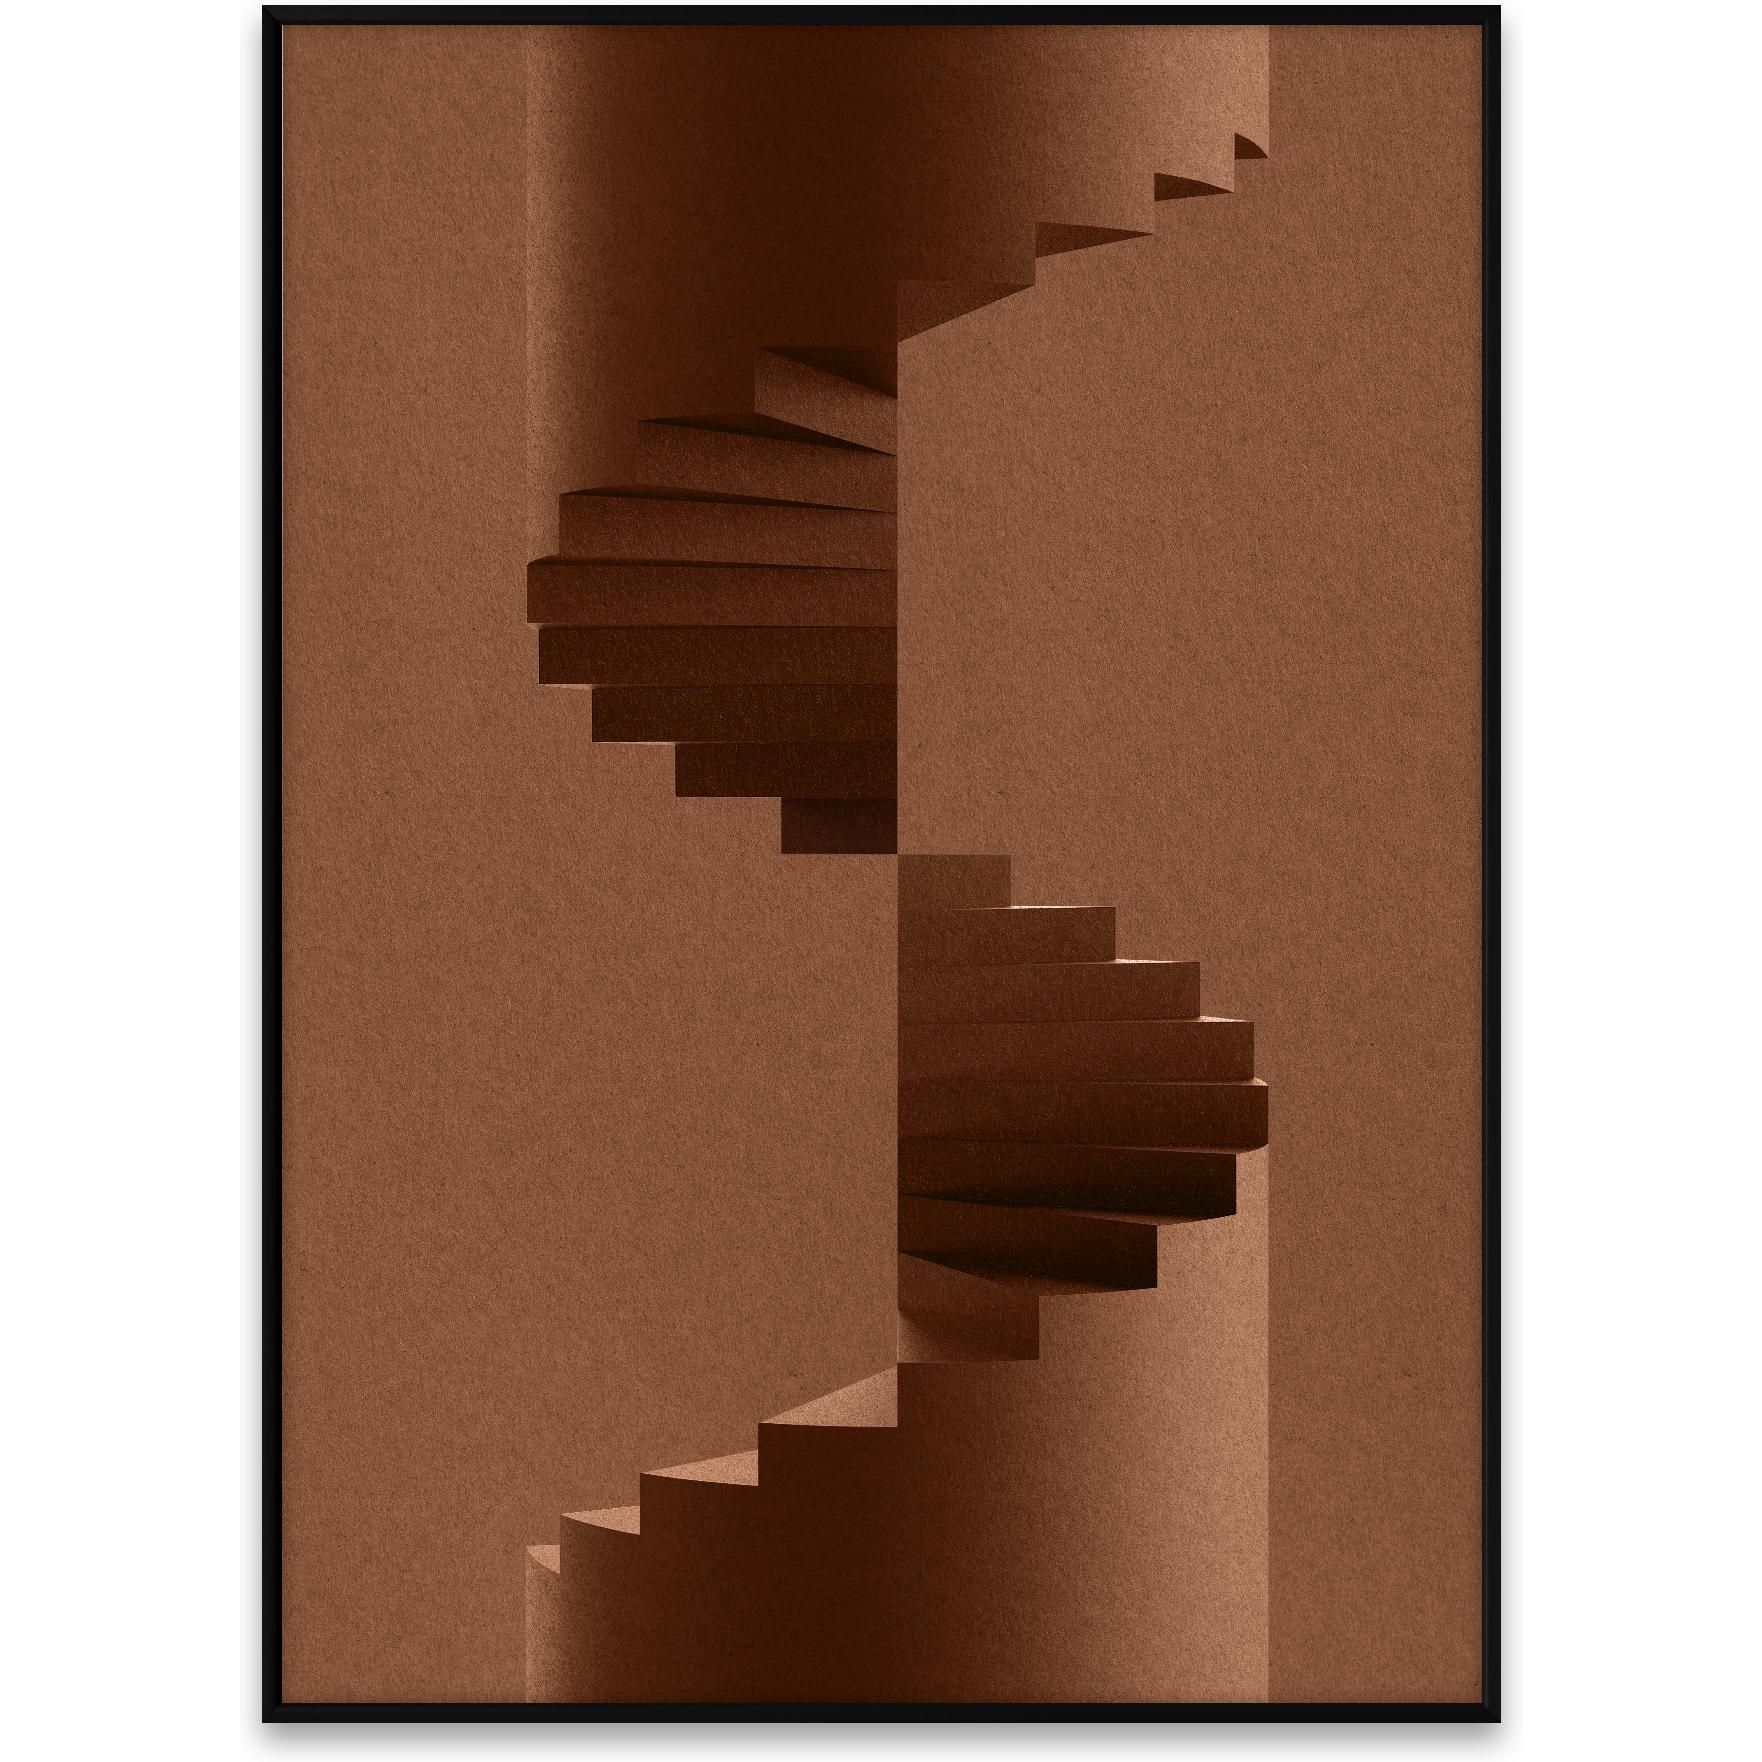 Paper Collective The Pillar Poster, 50x70 Cm